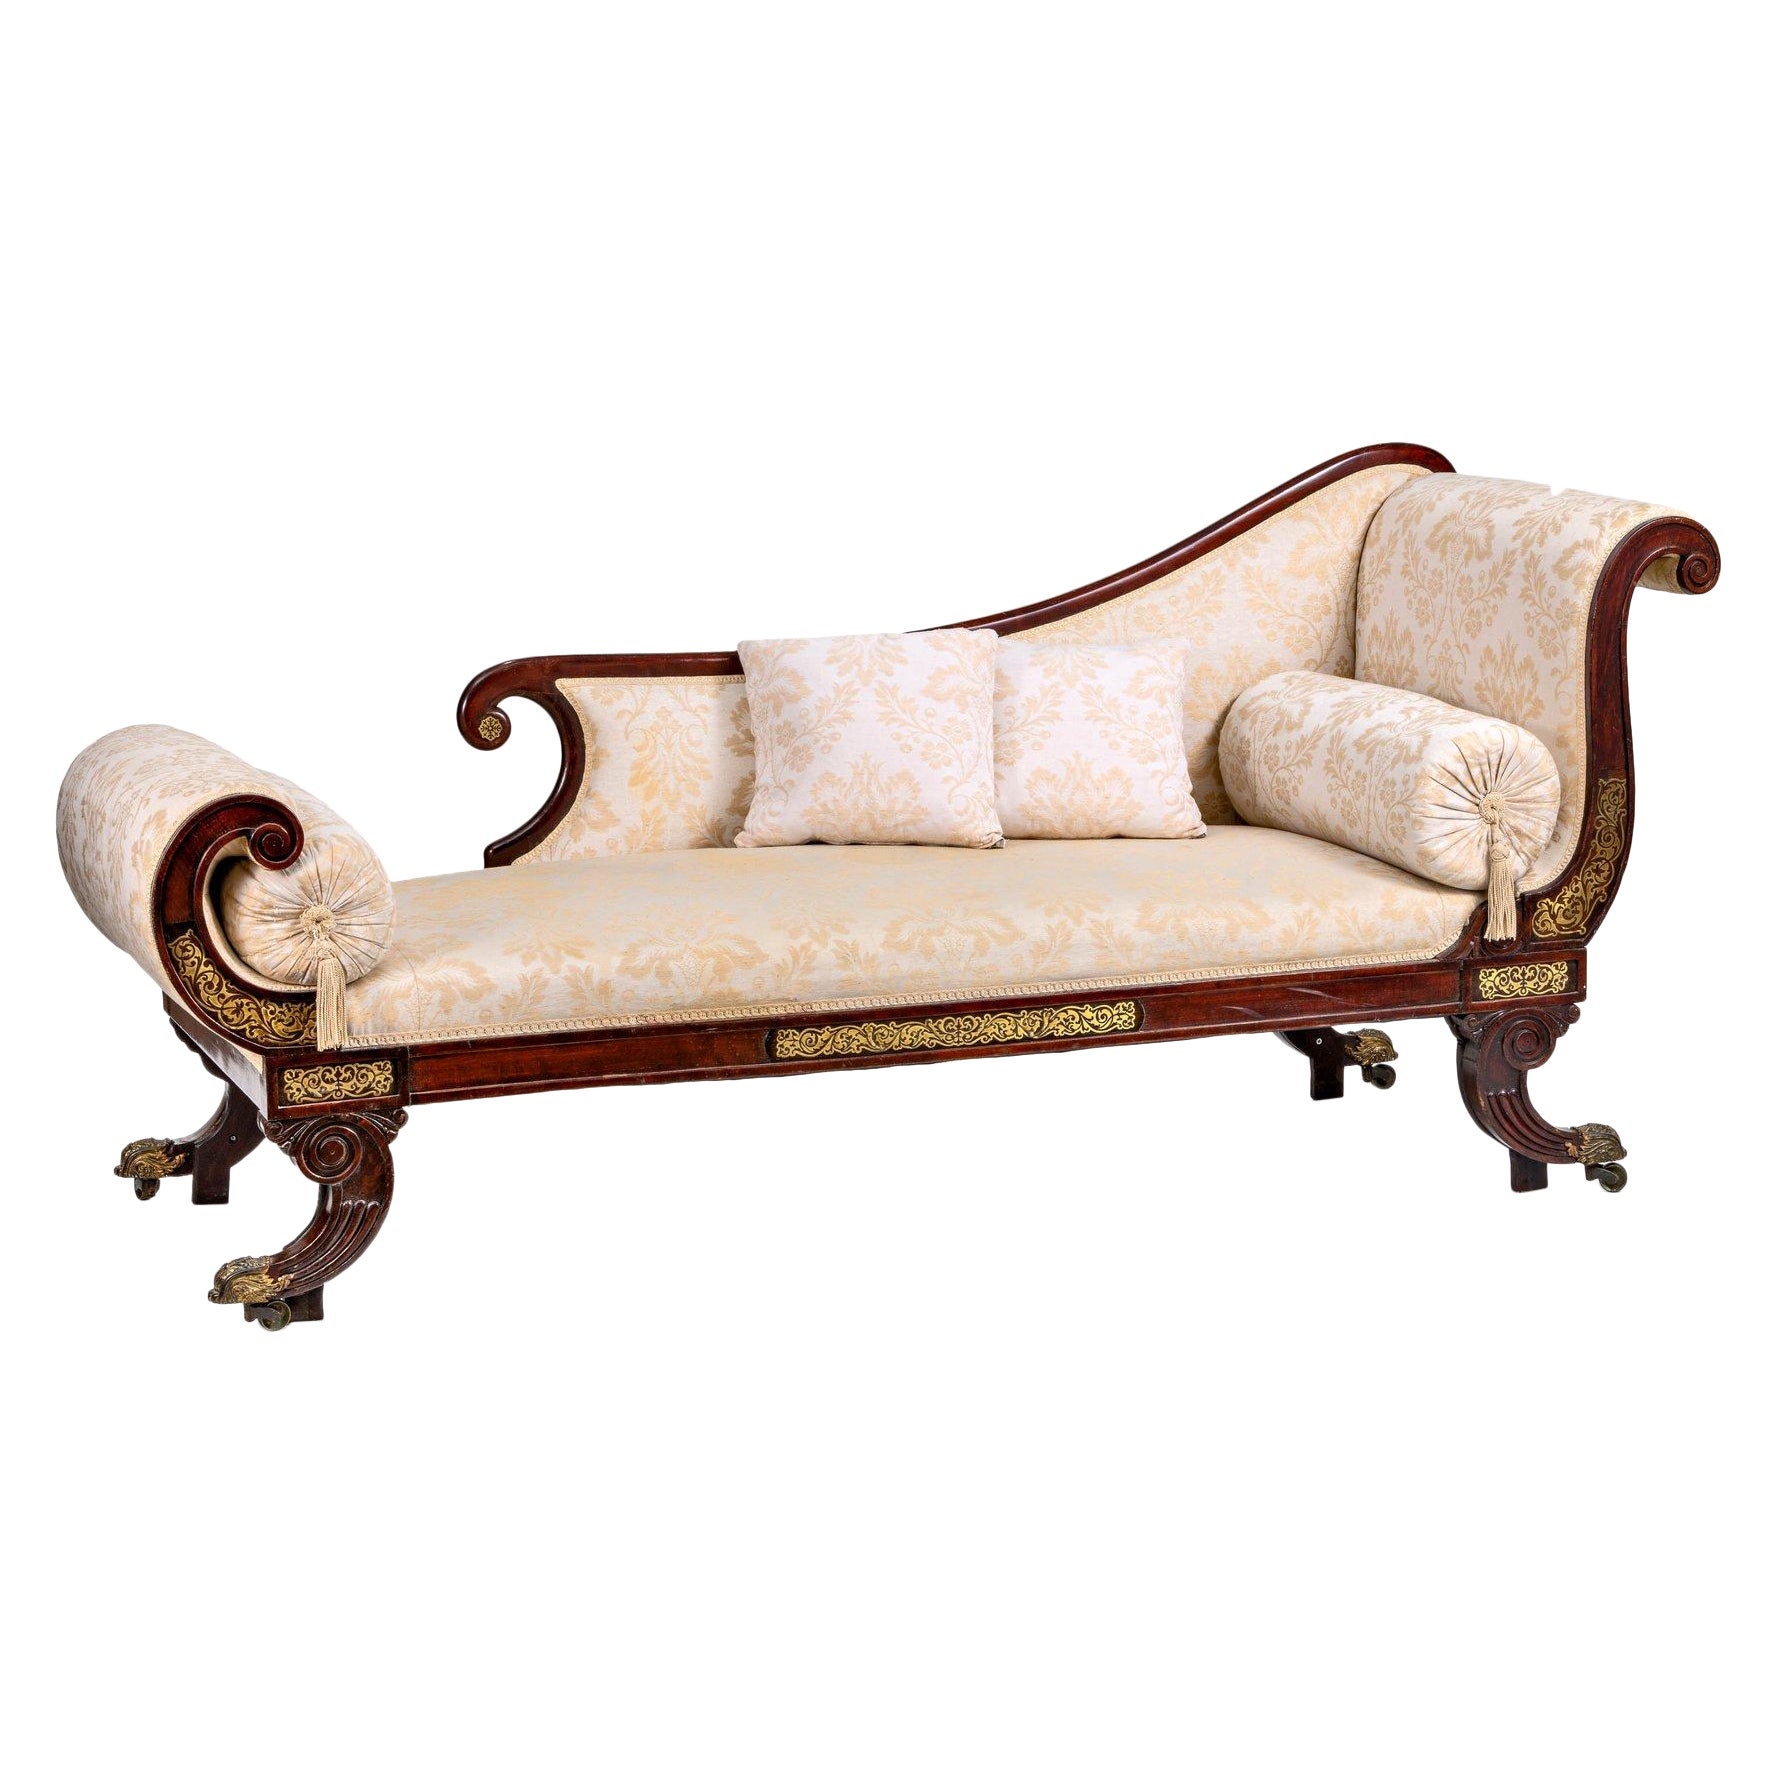 What is a chaise longue?